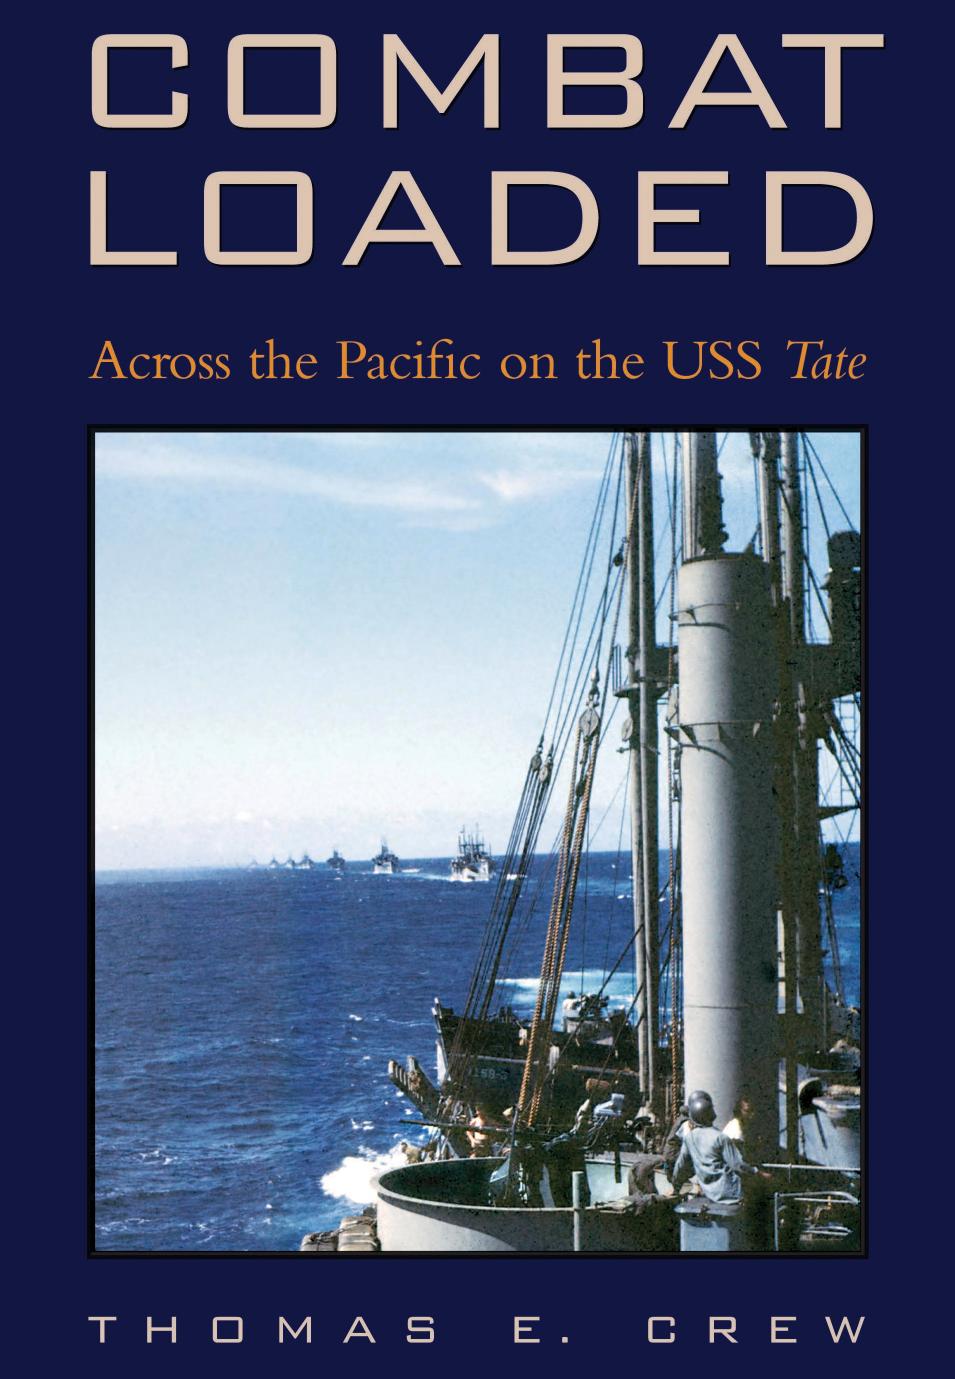 Combat Loaded: Across the Pacific on the USS Tate by Thomas E. Crew